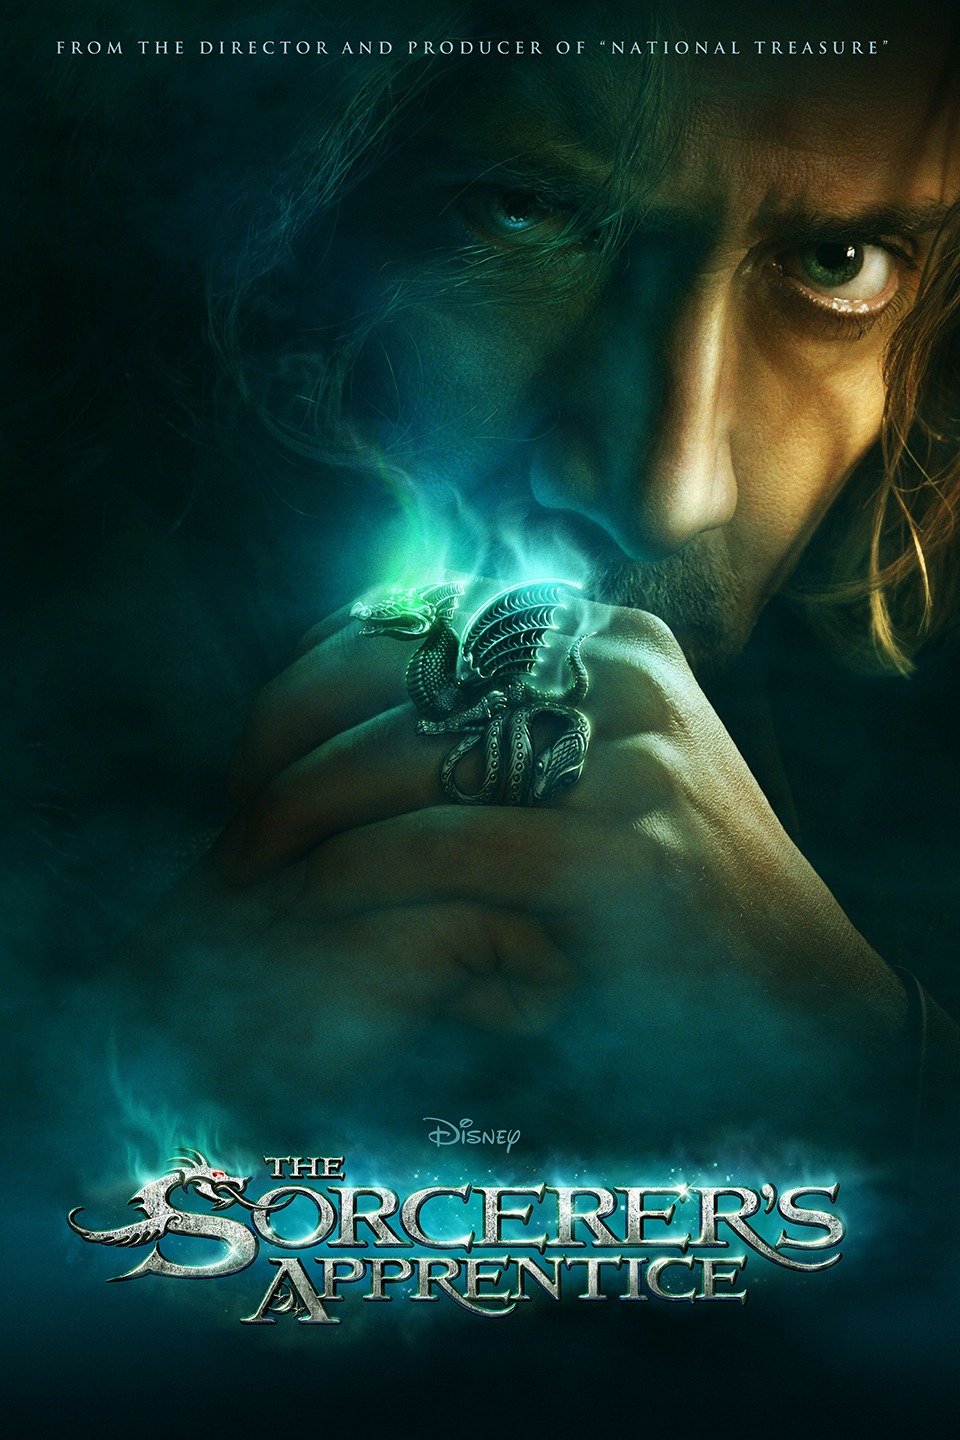 The Sorcerer's Apprentice - Rotten Tomatoes